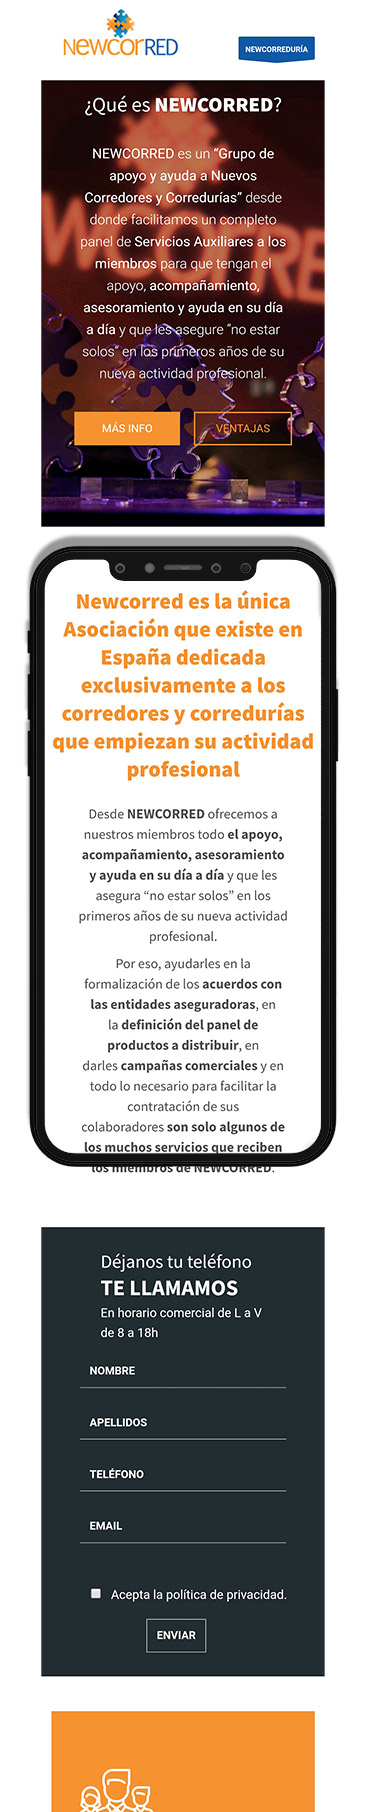 Newcorred movil 1